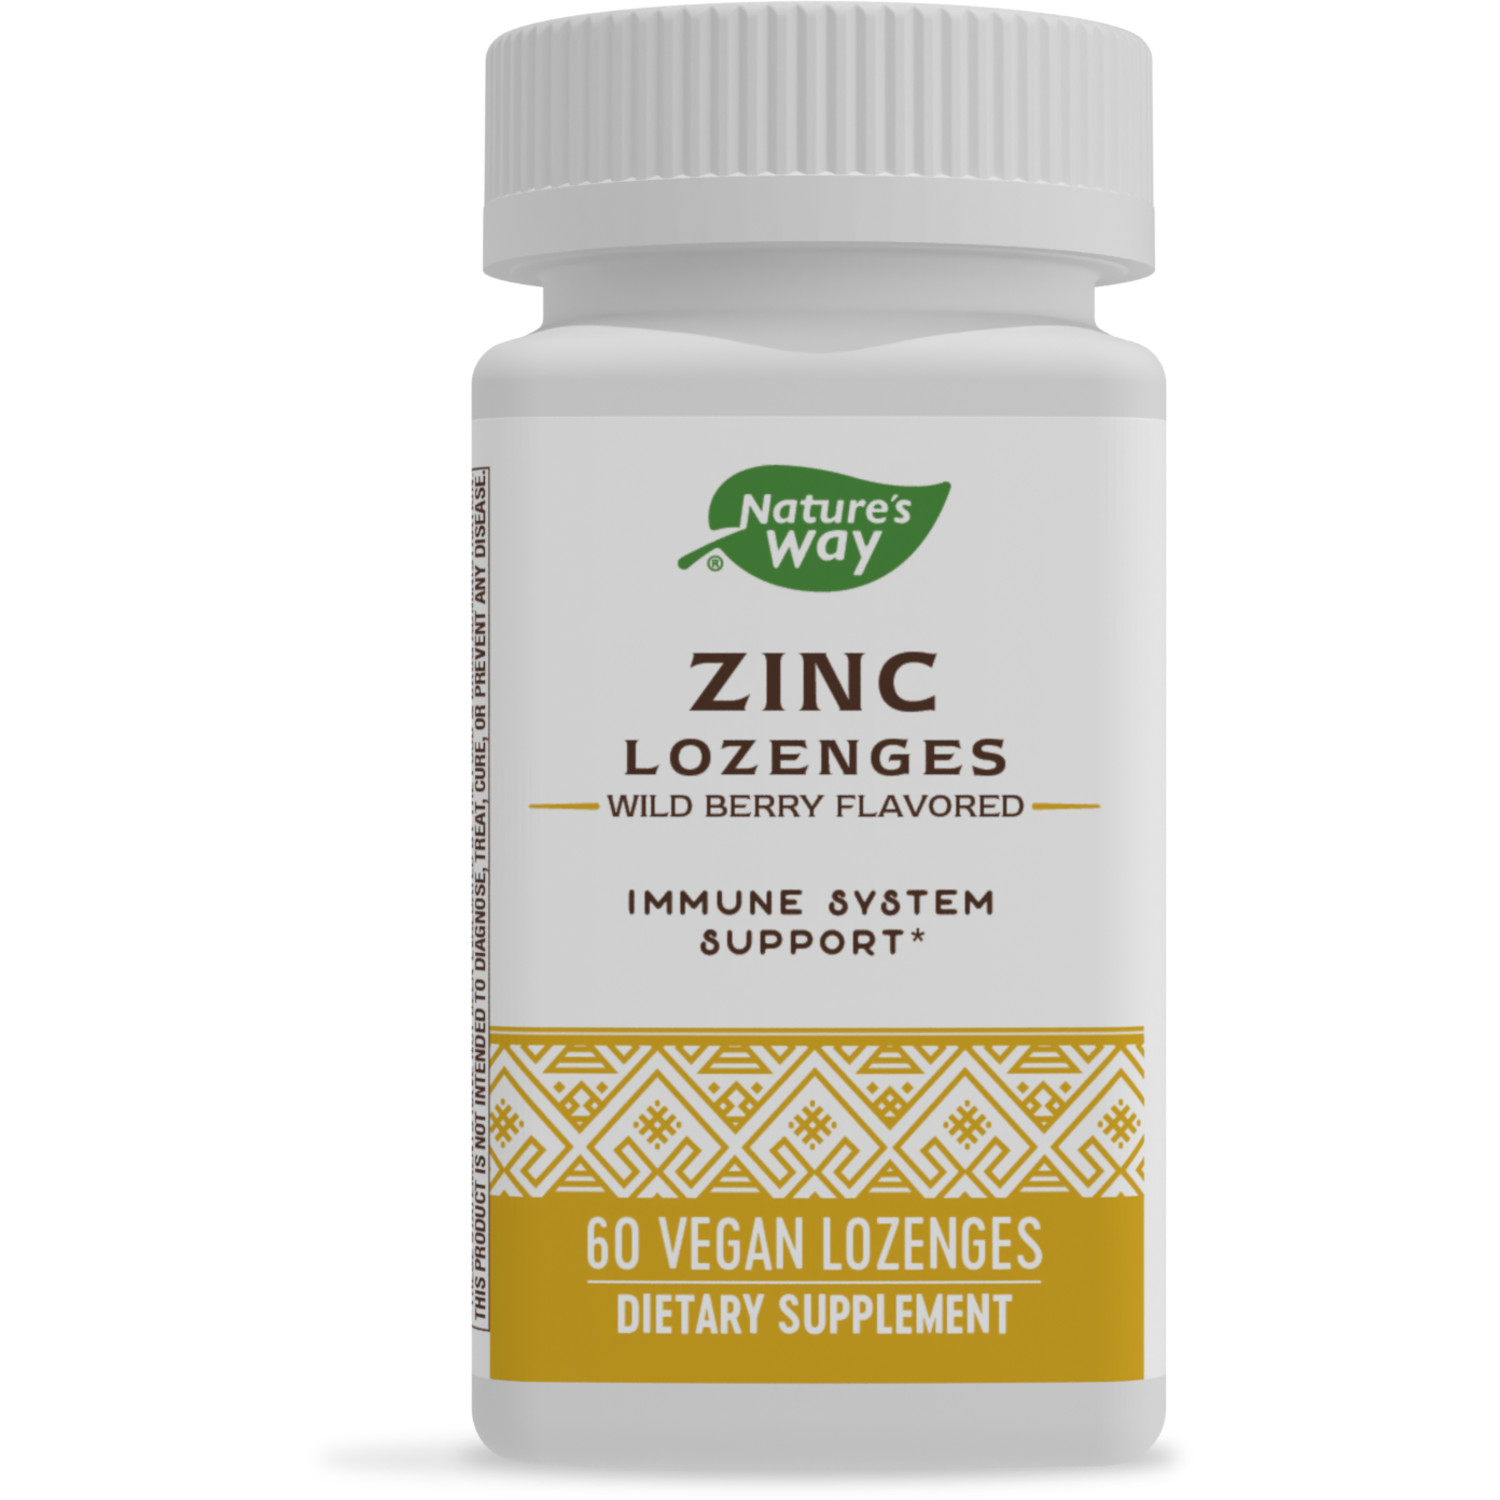 Nature's Way Zinc Lozenges, Immune Support, Wild Berry Flavored, 60 Lozenges - image 1 of 7